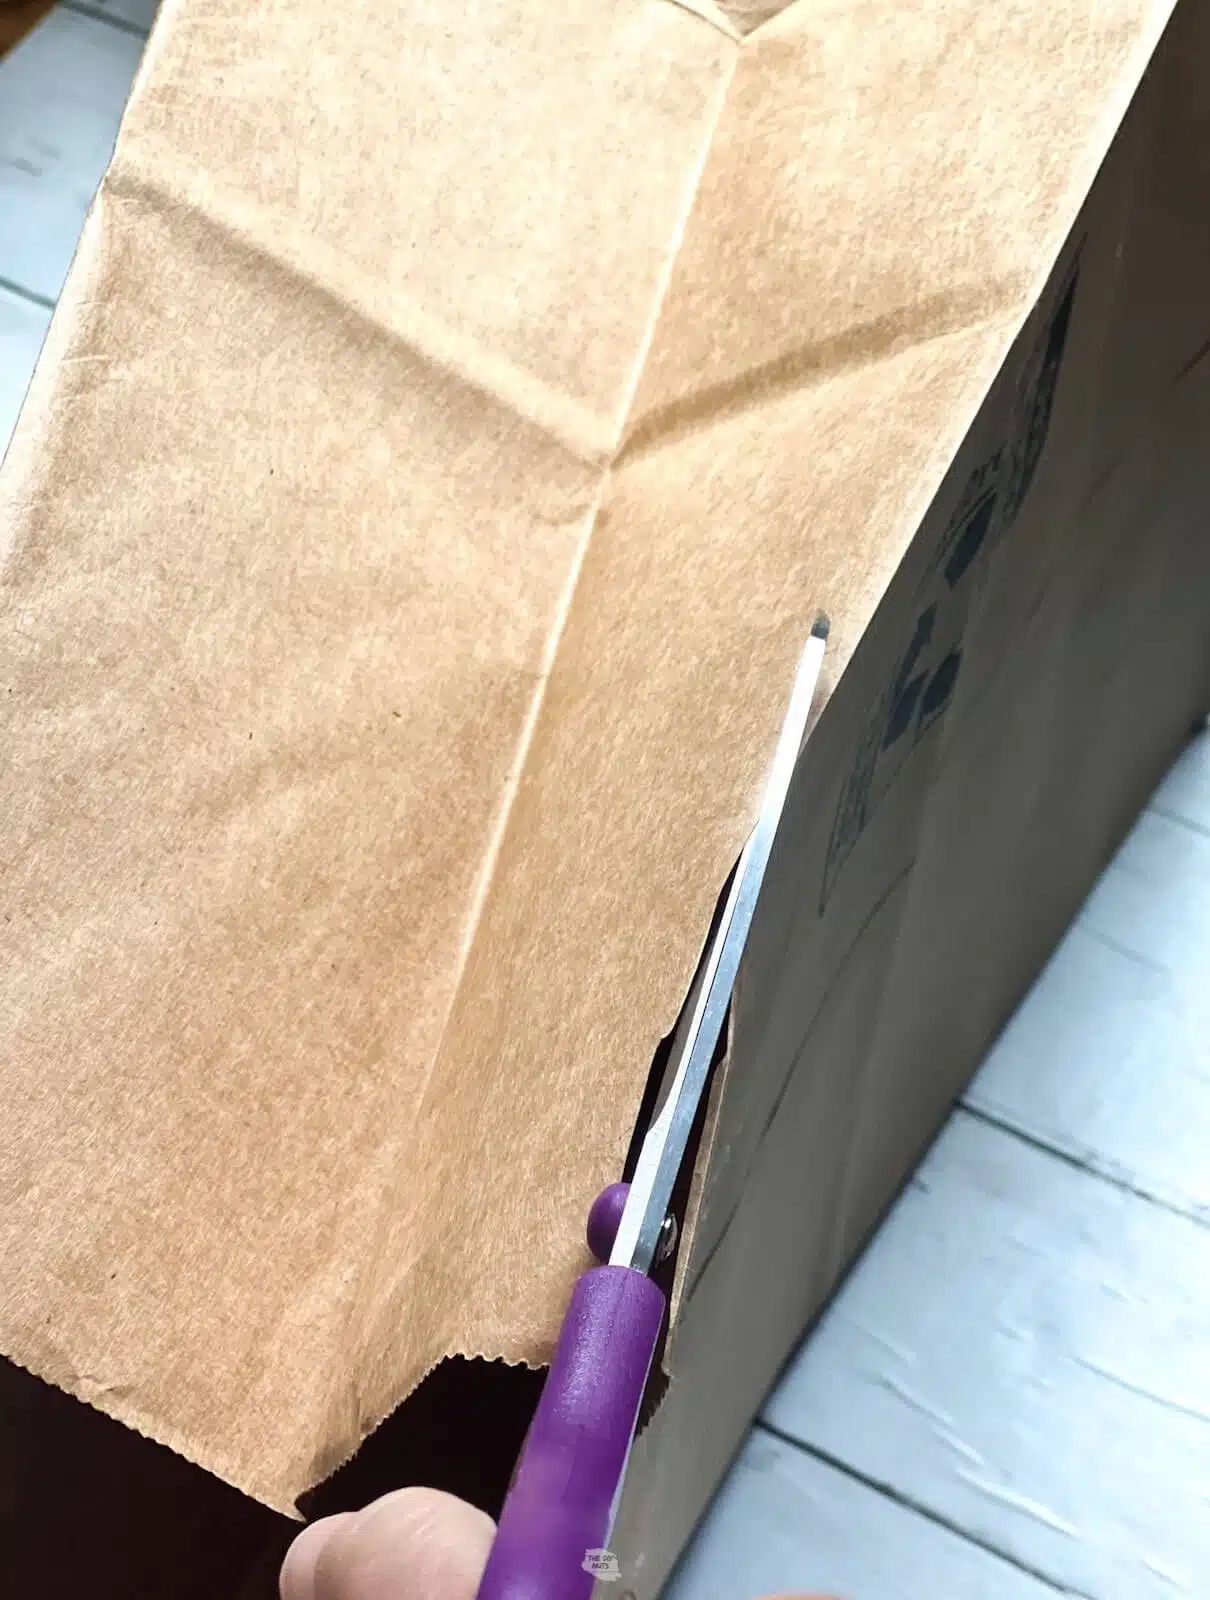 scissors cutting down side of brown bag.